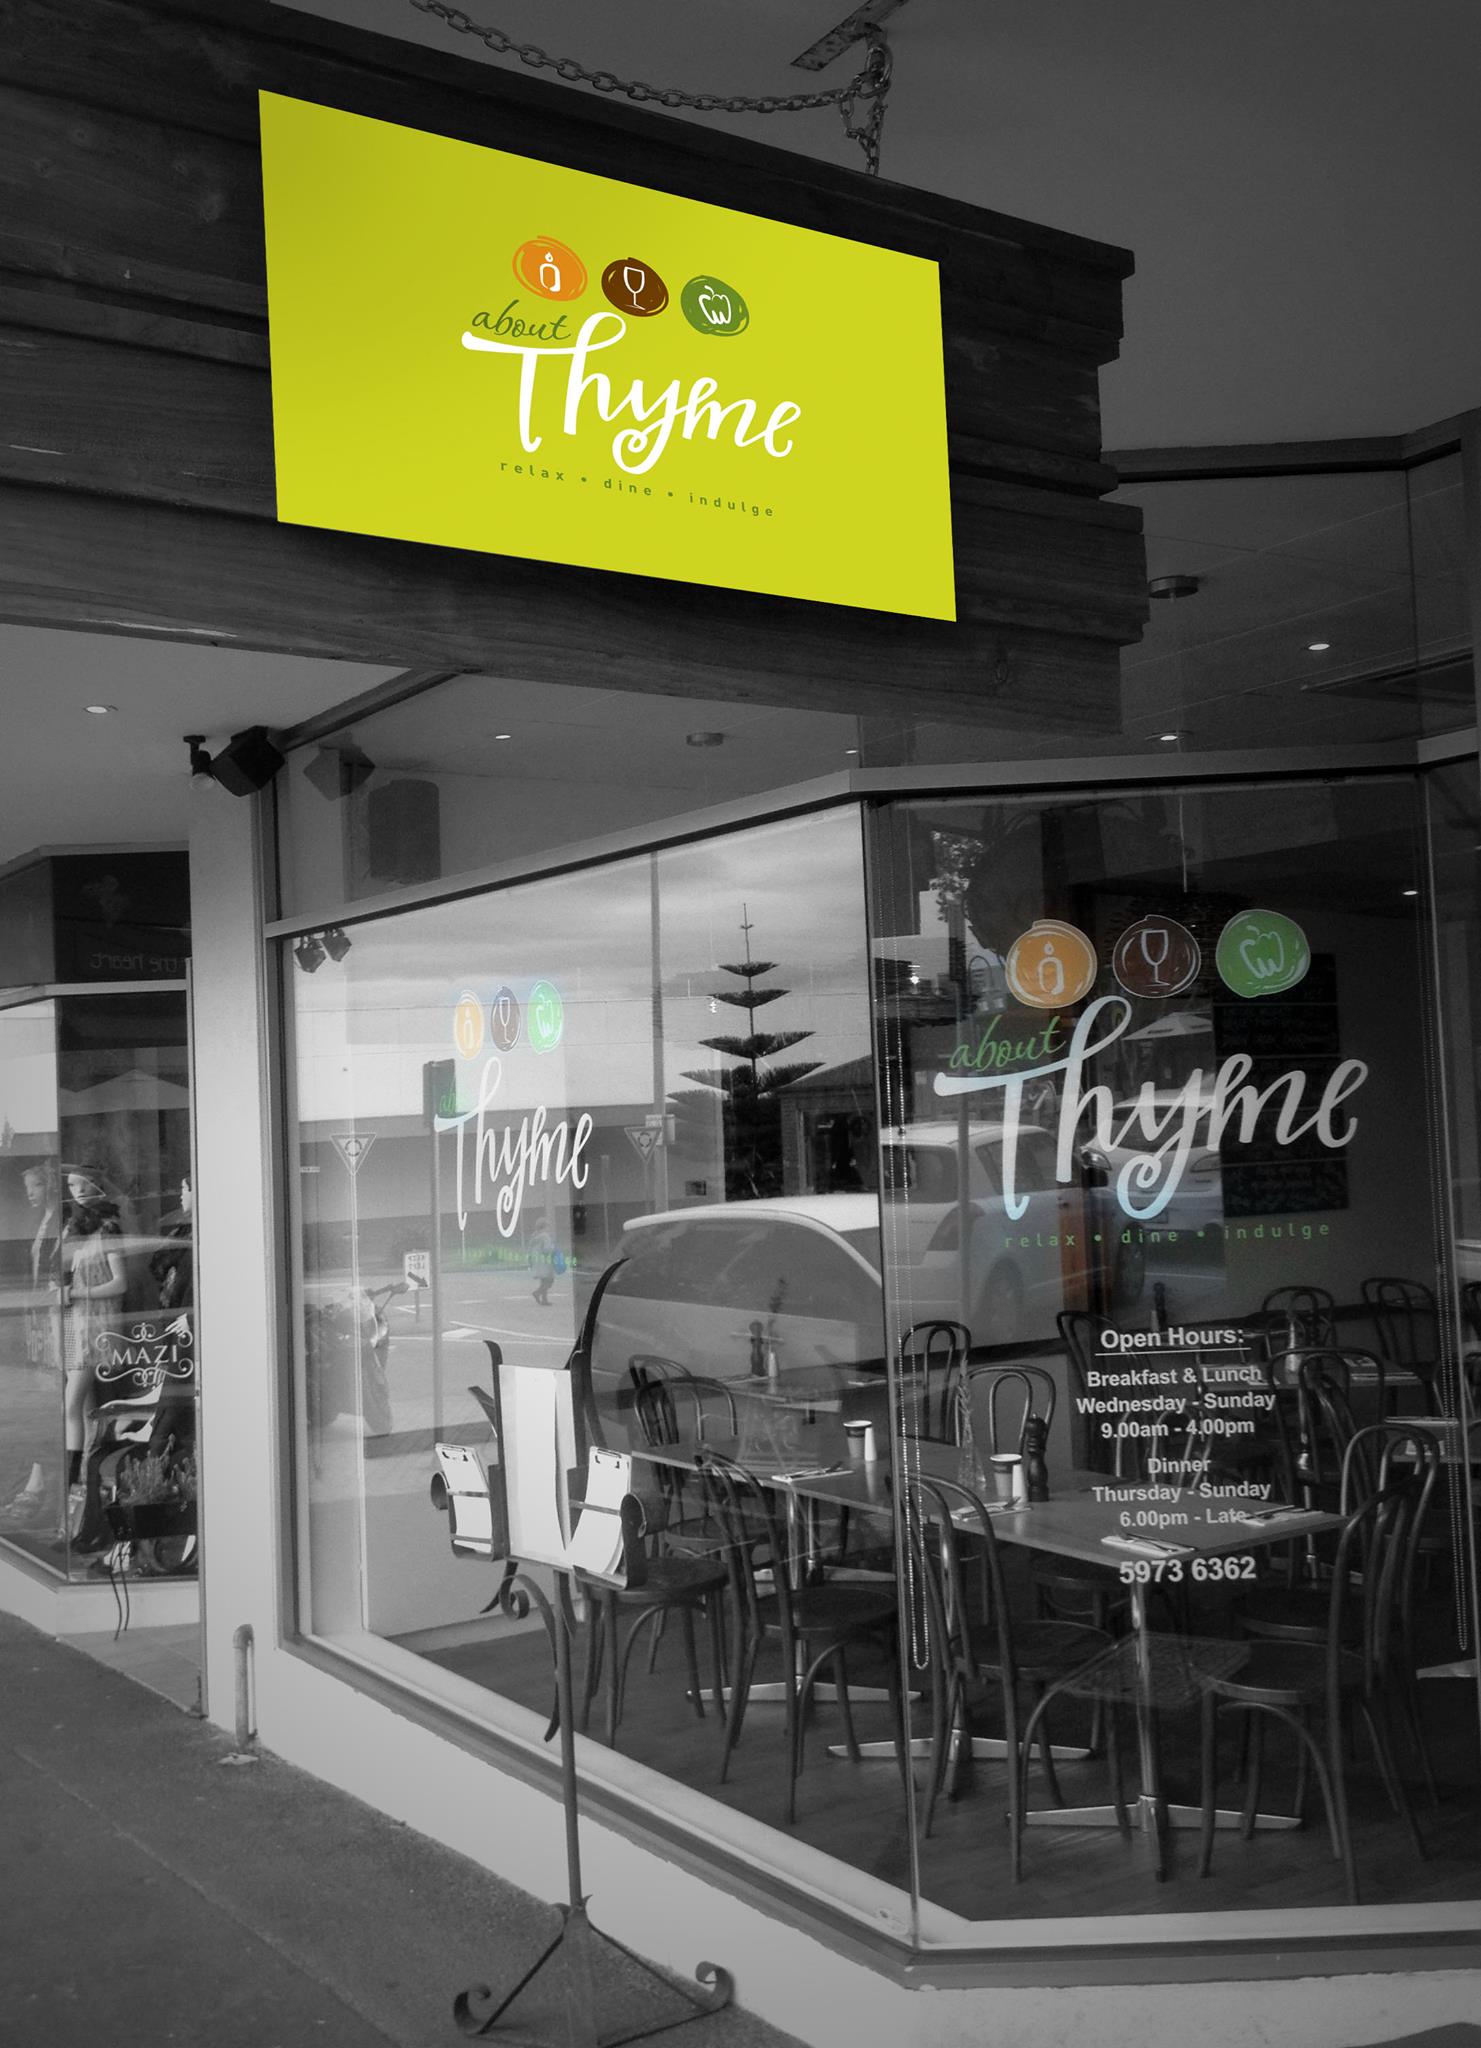 Event shop showroom branding about thyme